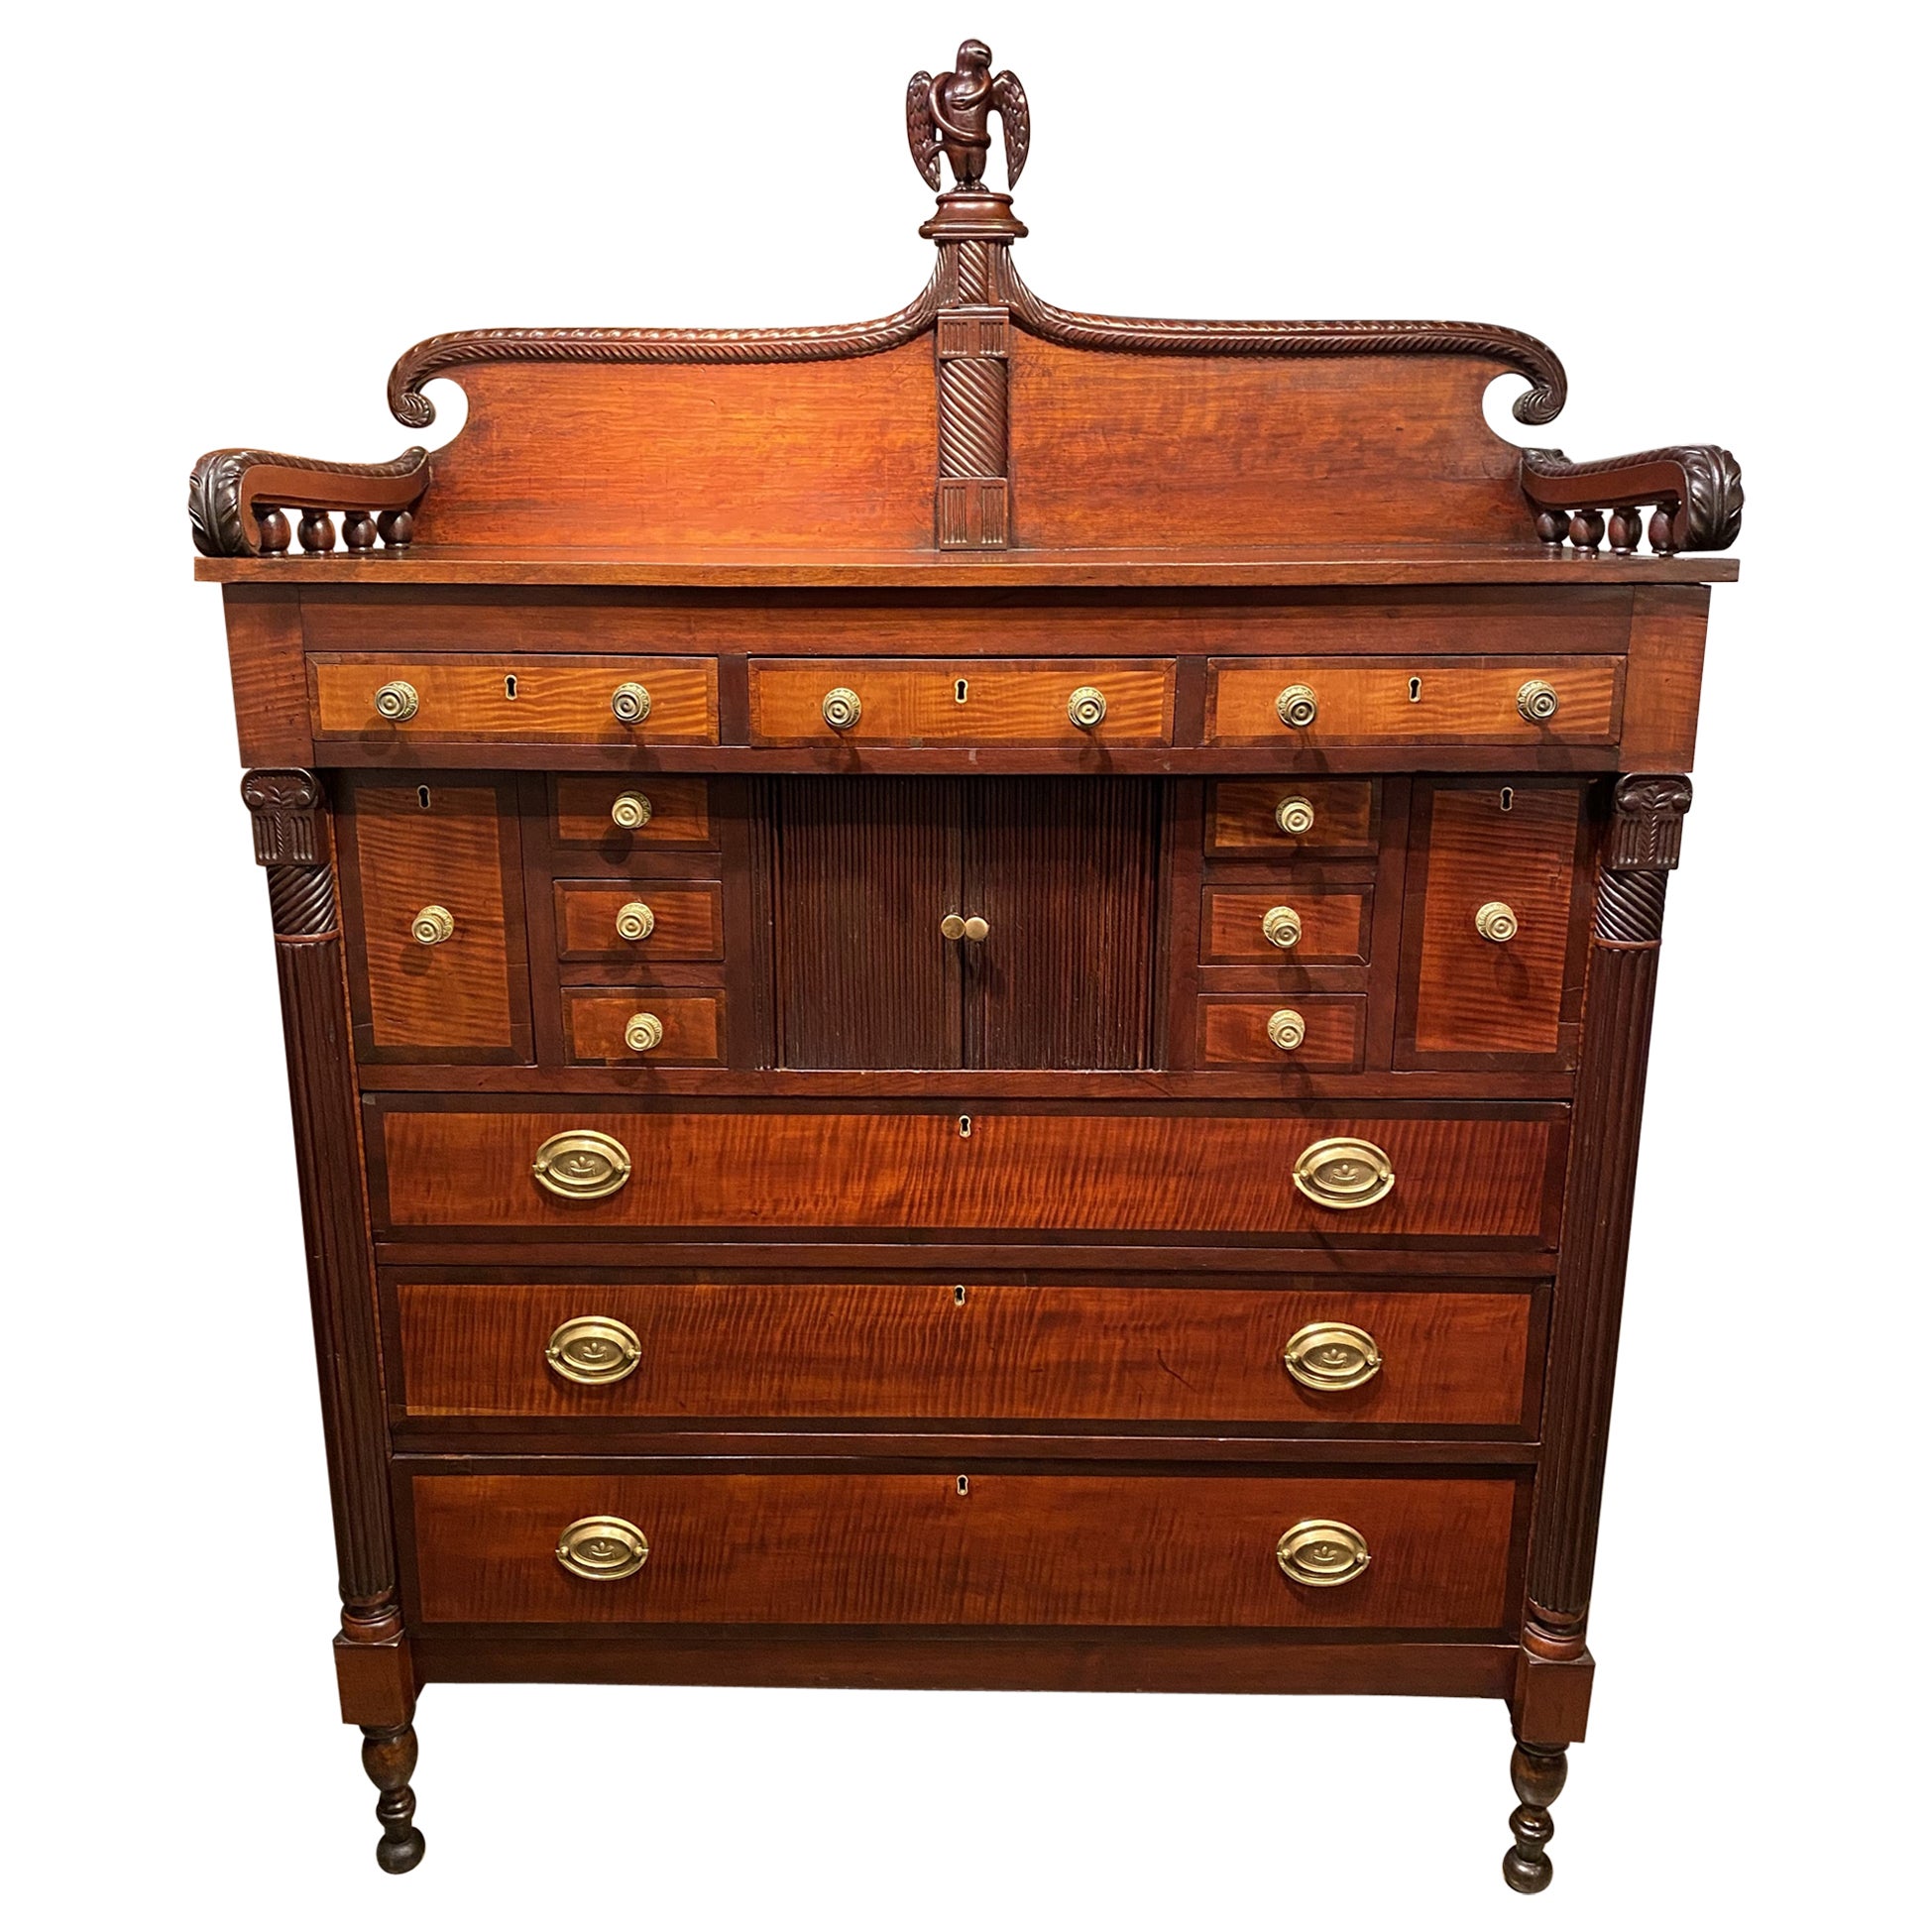 Sheraton Mahogany and Tiger Maple Chest or Server with Gallery and Tambour Doors